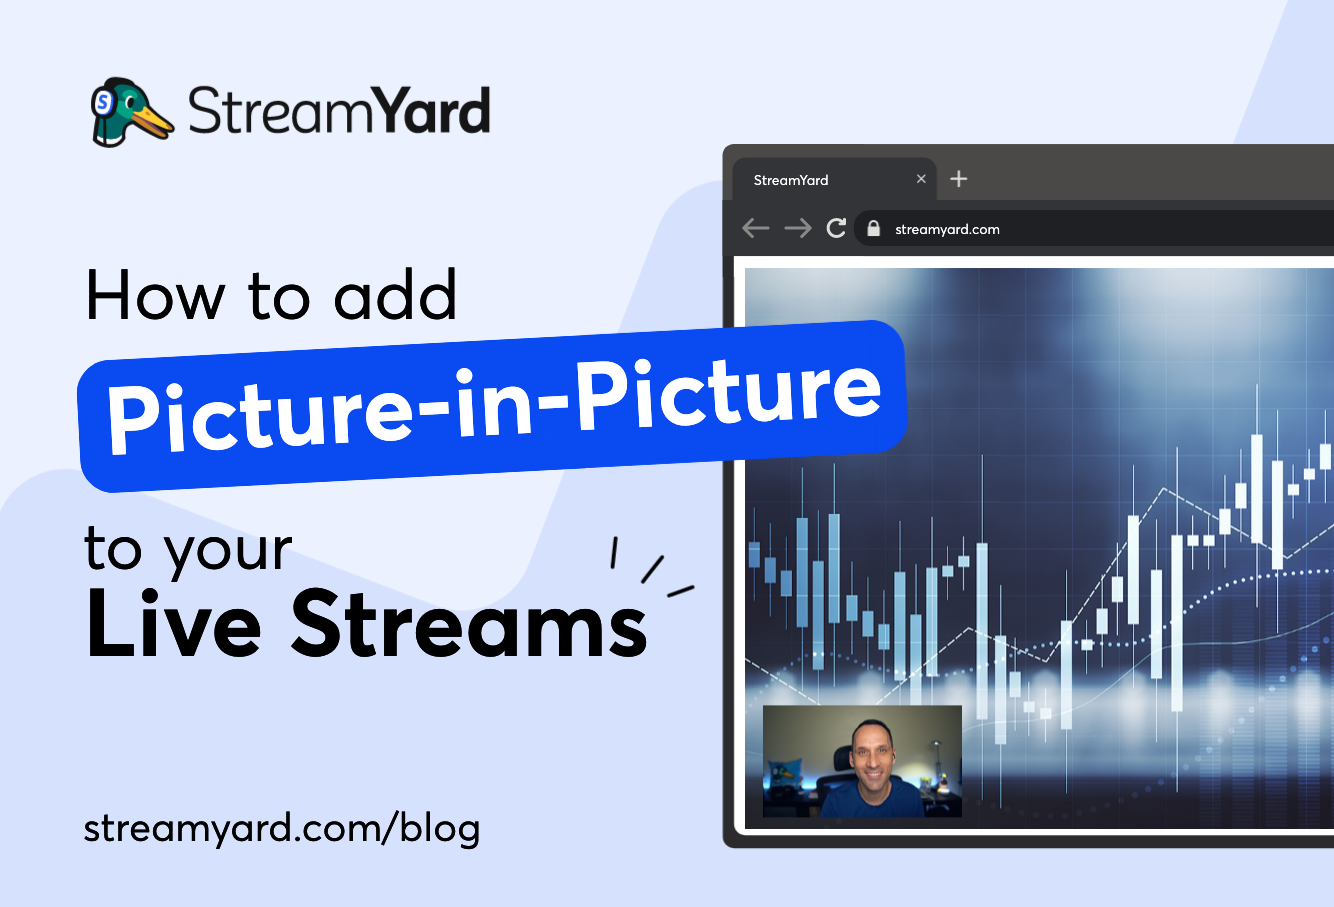 How To Add Picture-In-Picture In Your Live Streams Using StreamYard